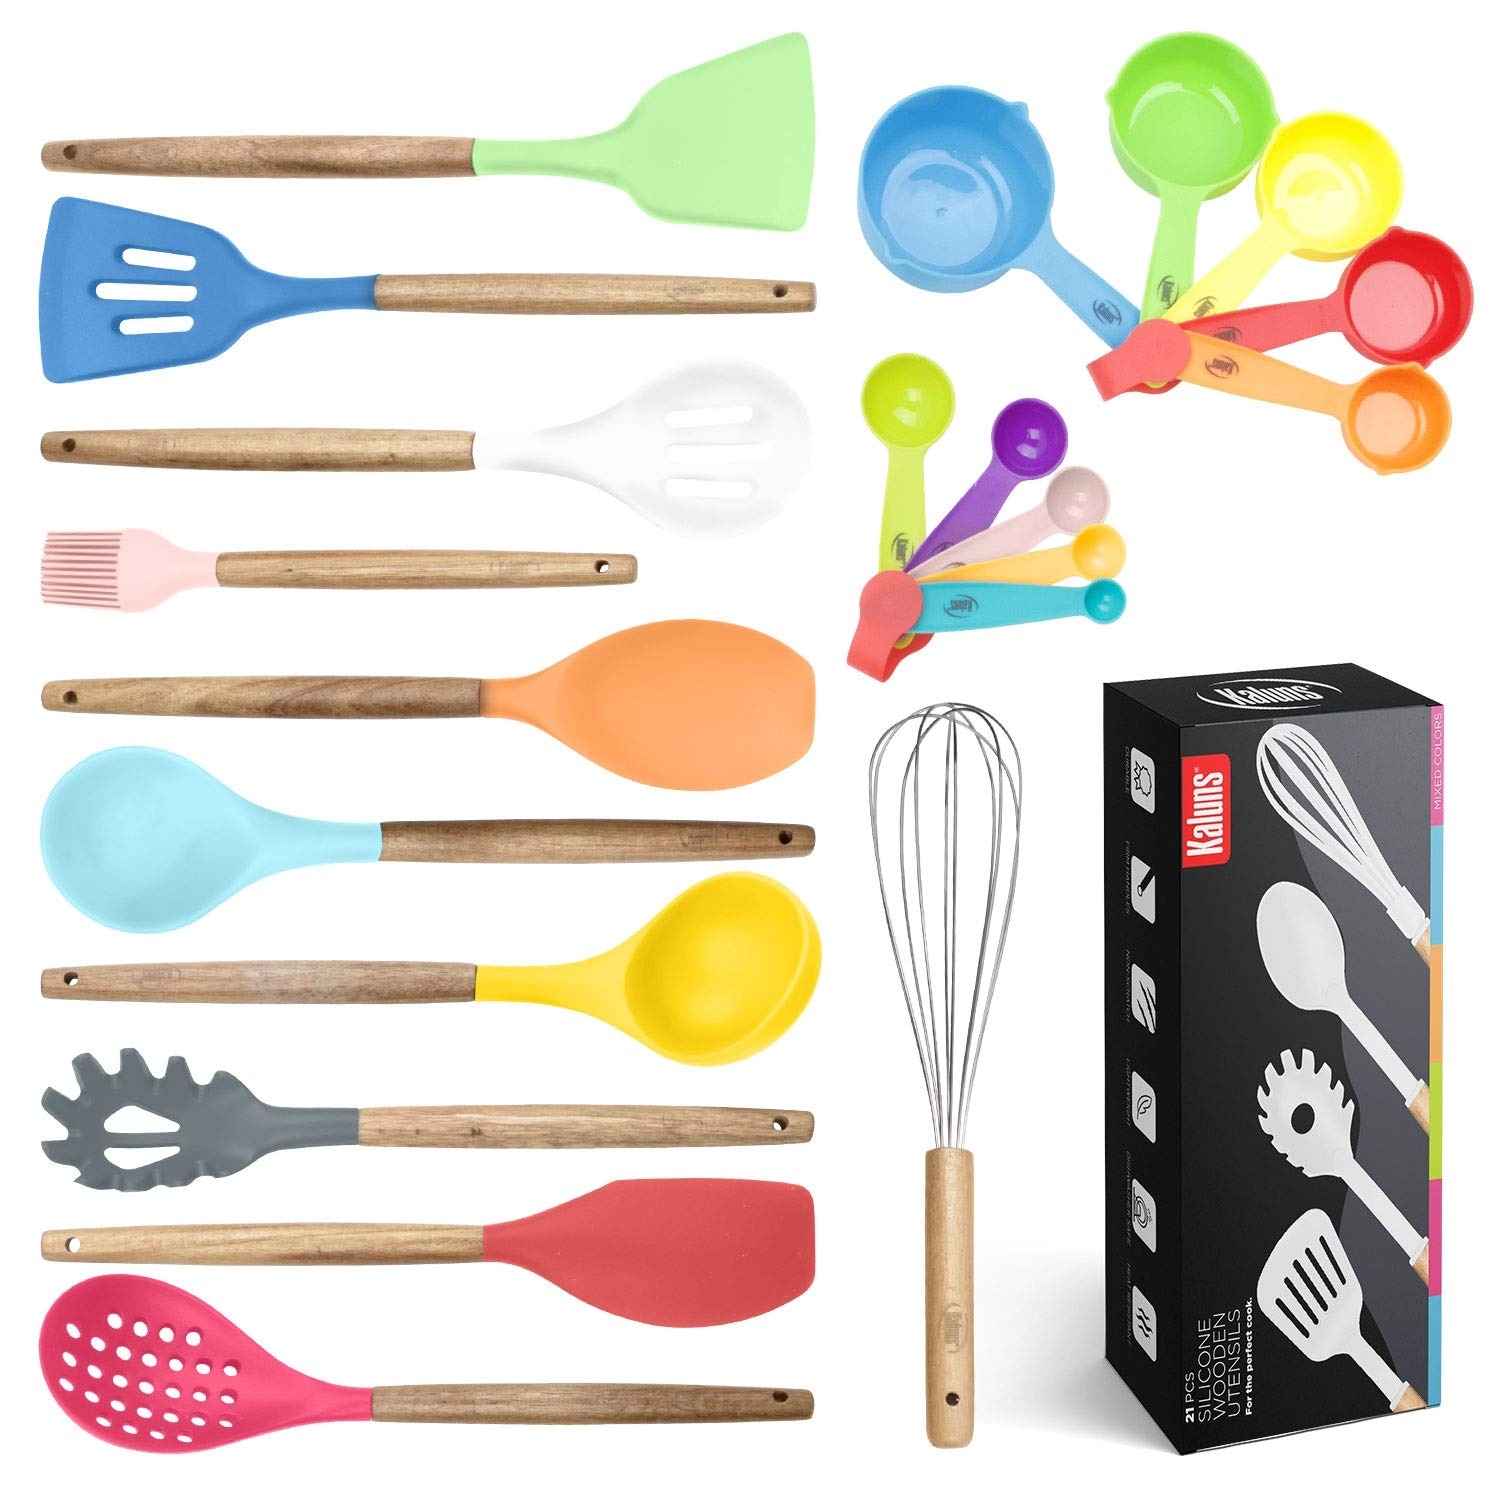  Kinfayv Silicone Cooking Utensils Kitchen Utensil Set, 21 PCS  Wooden Handle Nontoxic BPA Free Silicone Spoon Spatula Turner Tongs Kitchen  Gadgets Utensil Set for Nonstick Cookware with Holder (Khaki) : Home